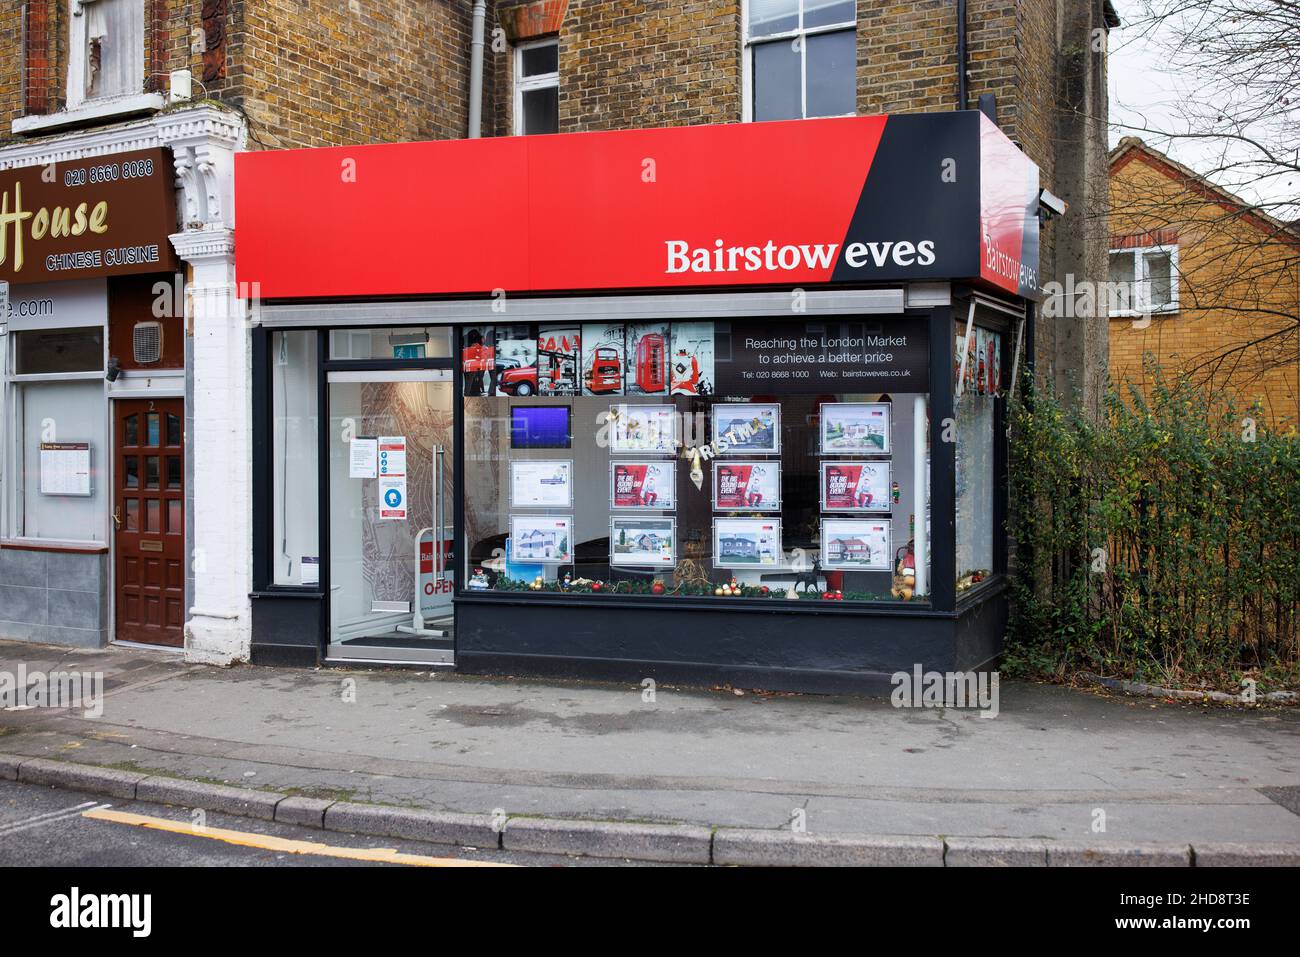 Bairstow Eves Immobilienmakler in Station Approach, Hayes Lane, Kenley CR8 5JD Stockfoto